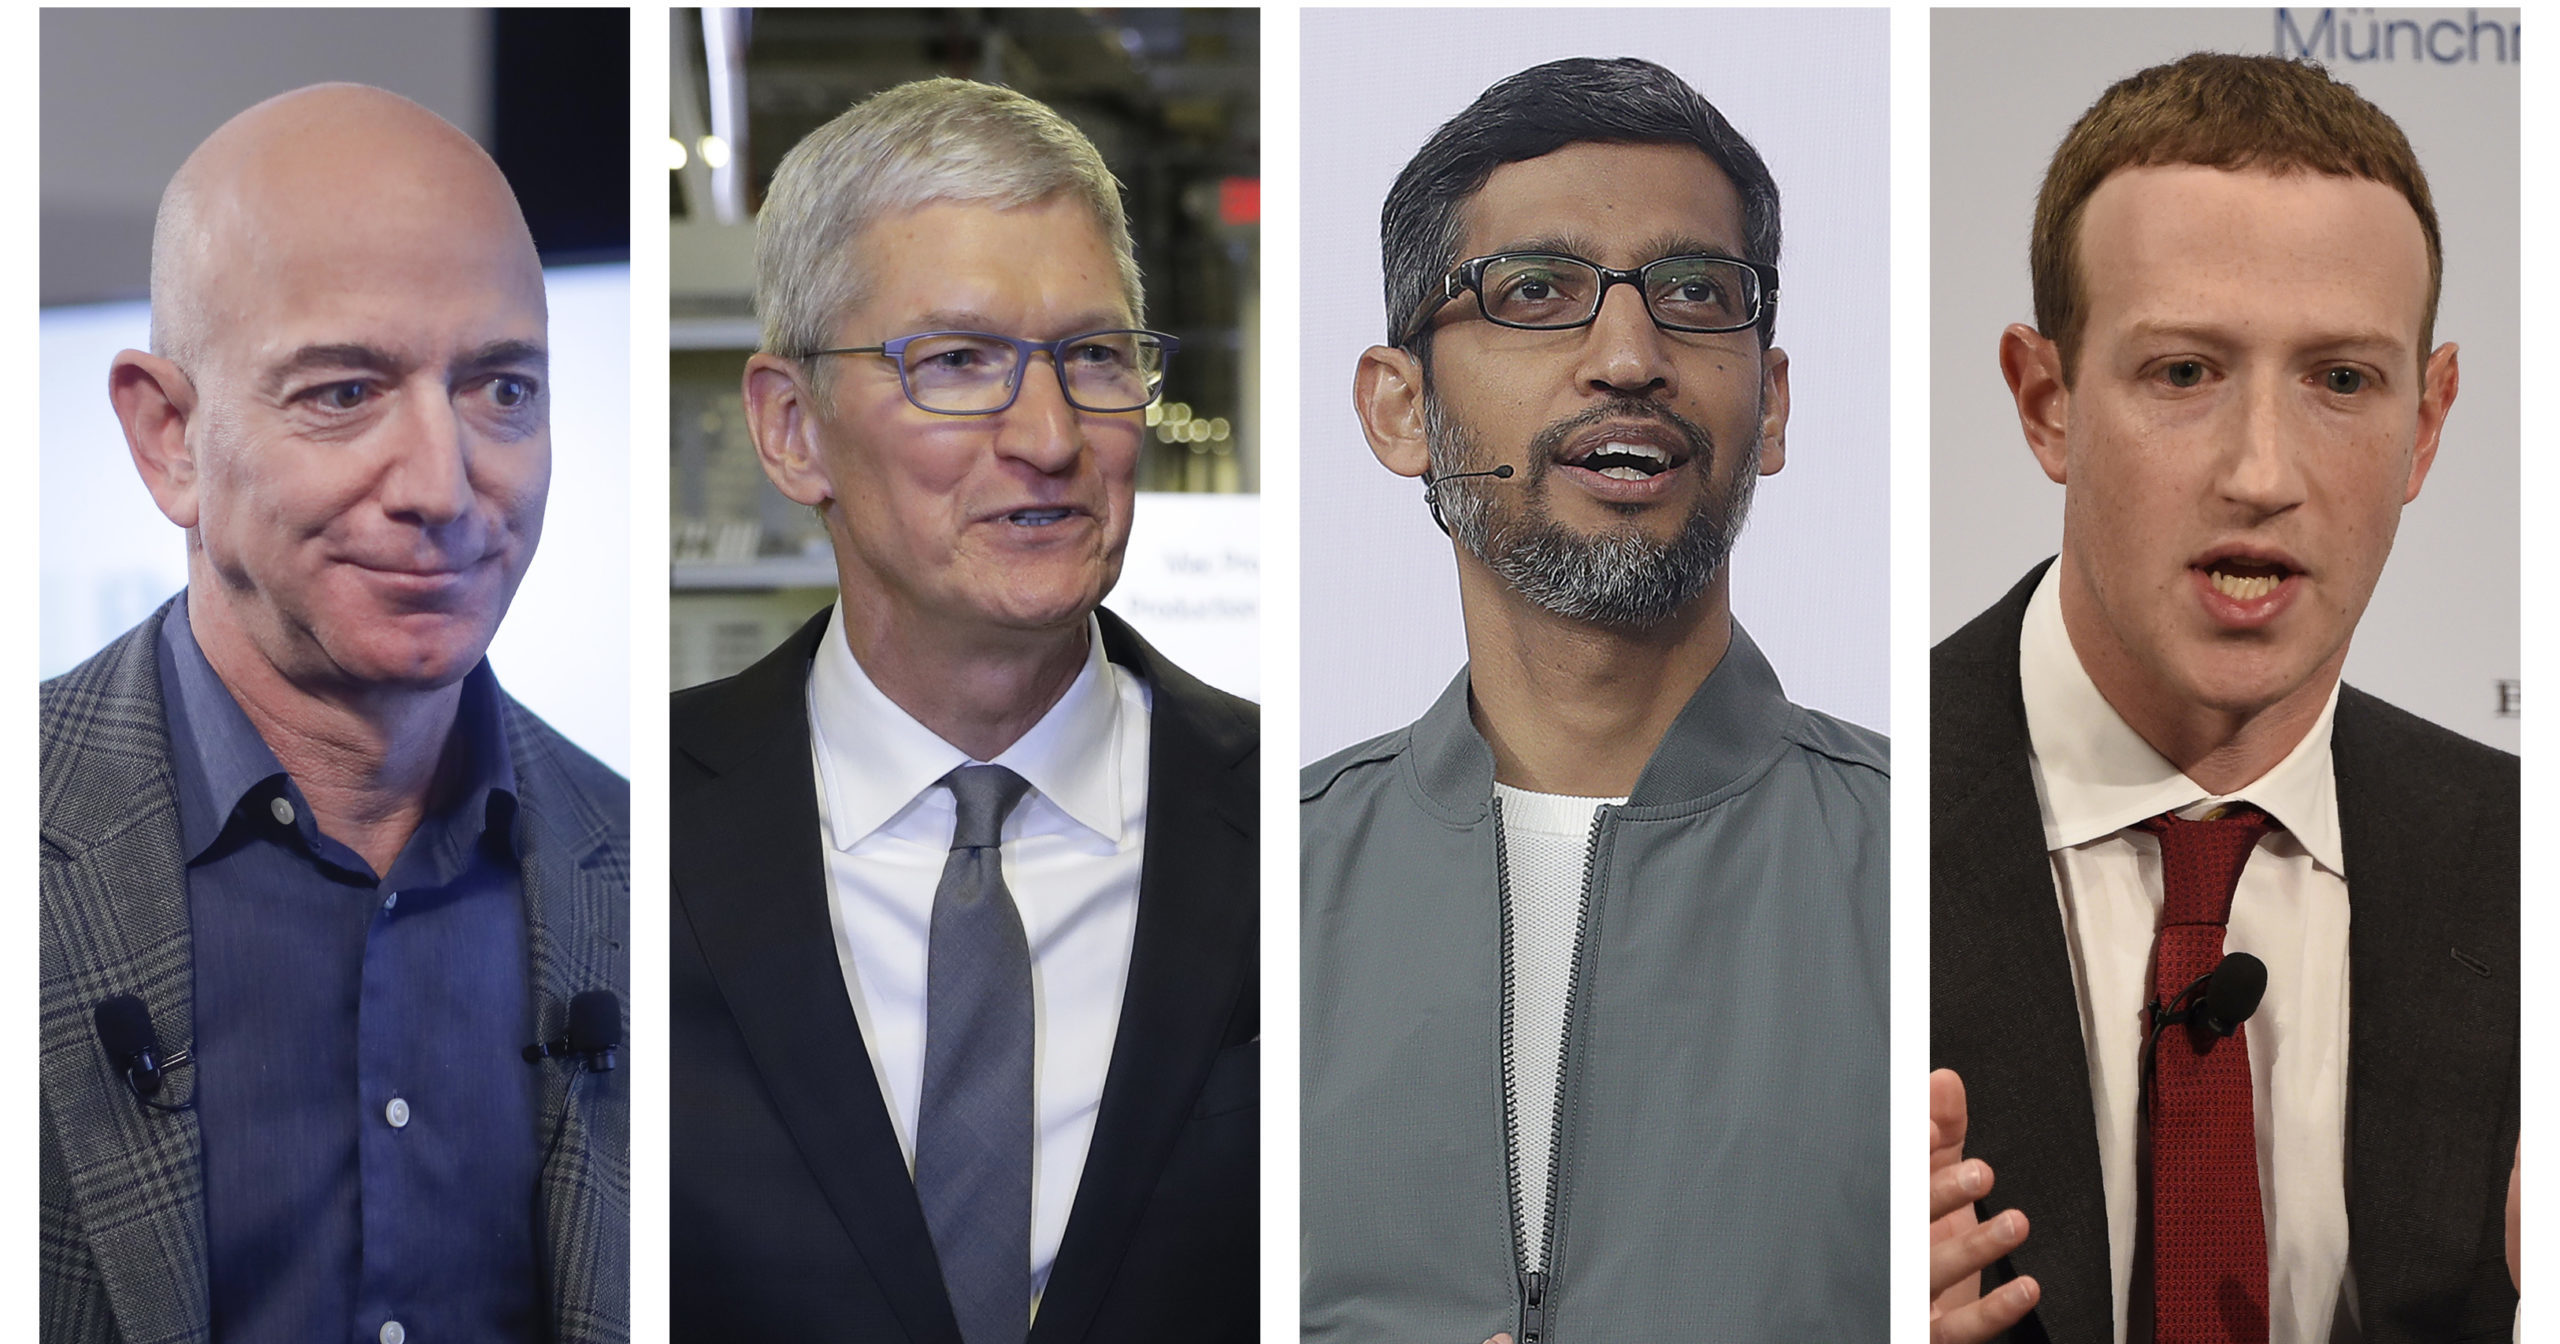 This combination of 2019-2020 photos shows Amazon CEO Jeff Bezos, Apple CEO Tim Cook, Google CEO Sundar Pichai and Facebook CEO Mark Zuckerberg. On July 29, 2020, the four big tech leaders will answer for their companies’ practices before Congress at a House Judiciary subcommittee hearing on antitrust.